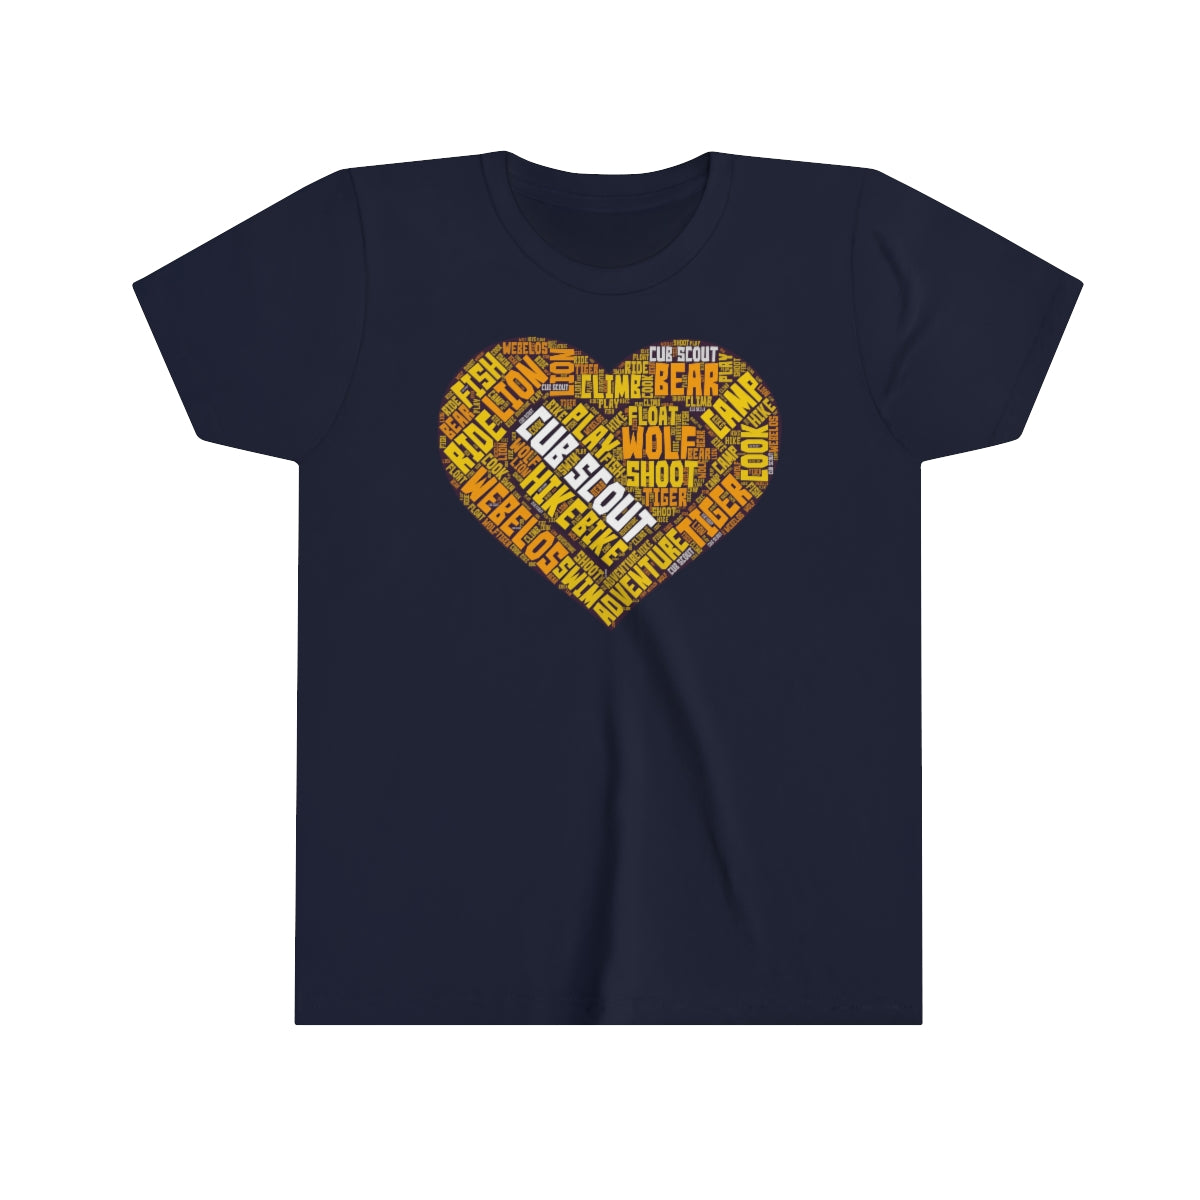 Cub Scout Heart Tee - Youth